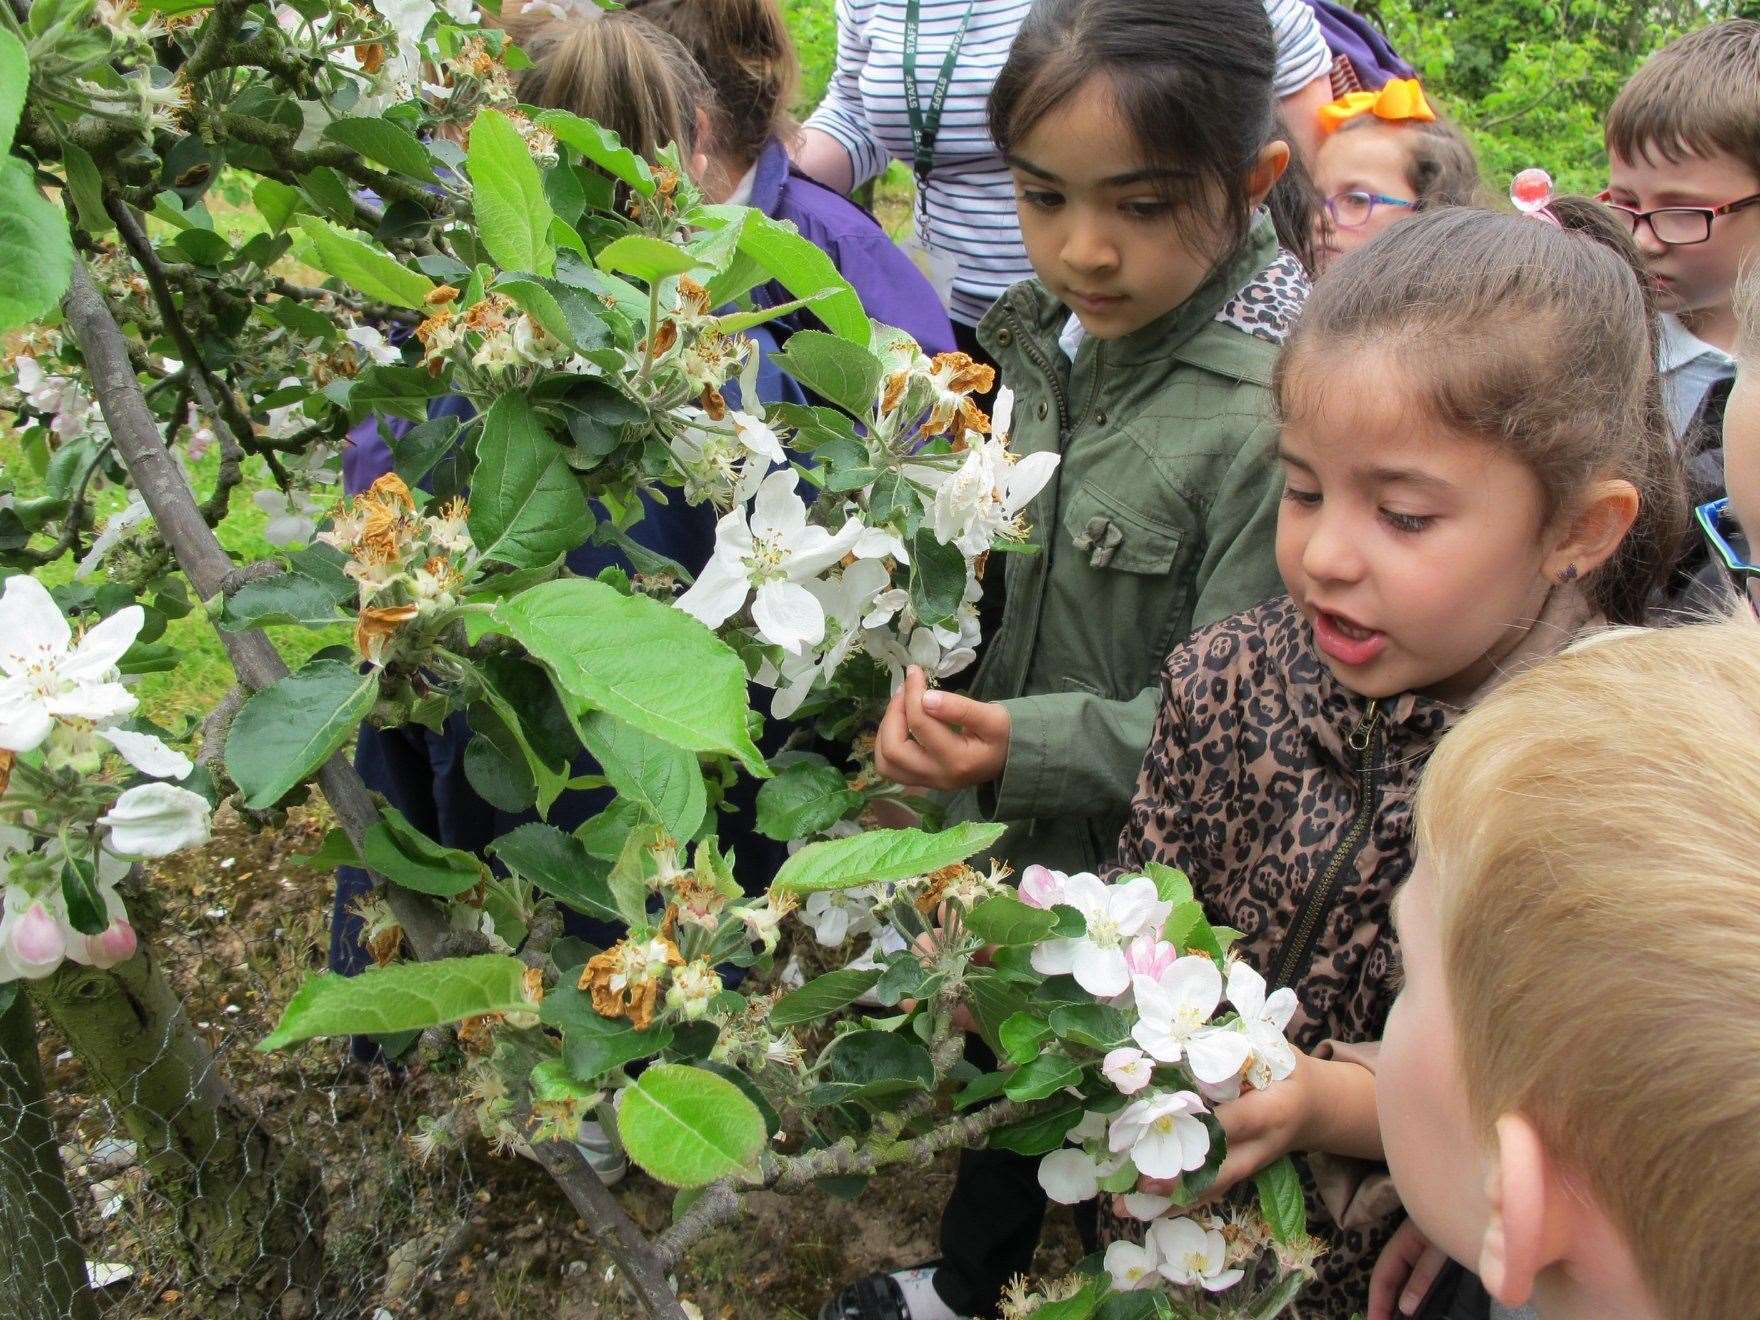 Learning about nature at Brogdale in Faversham